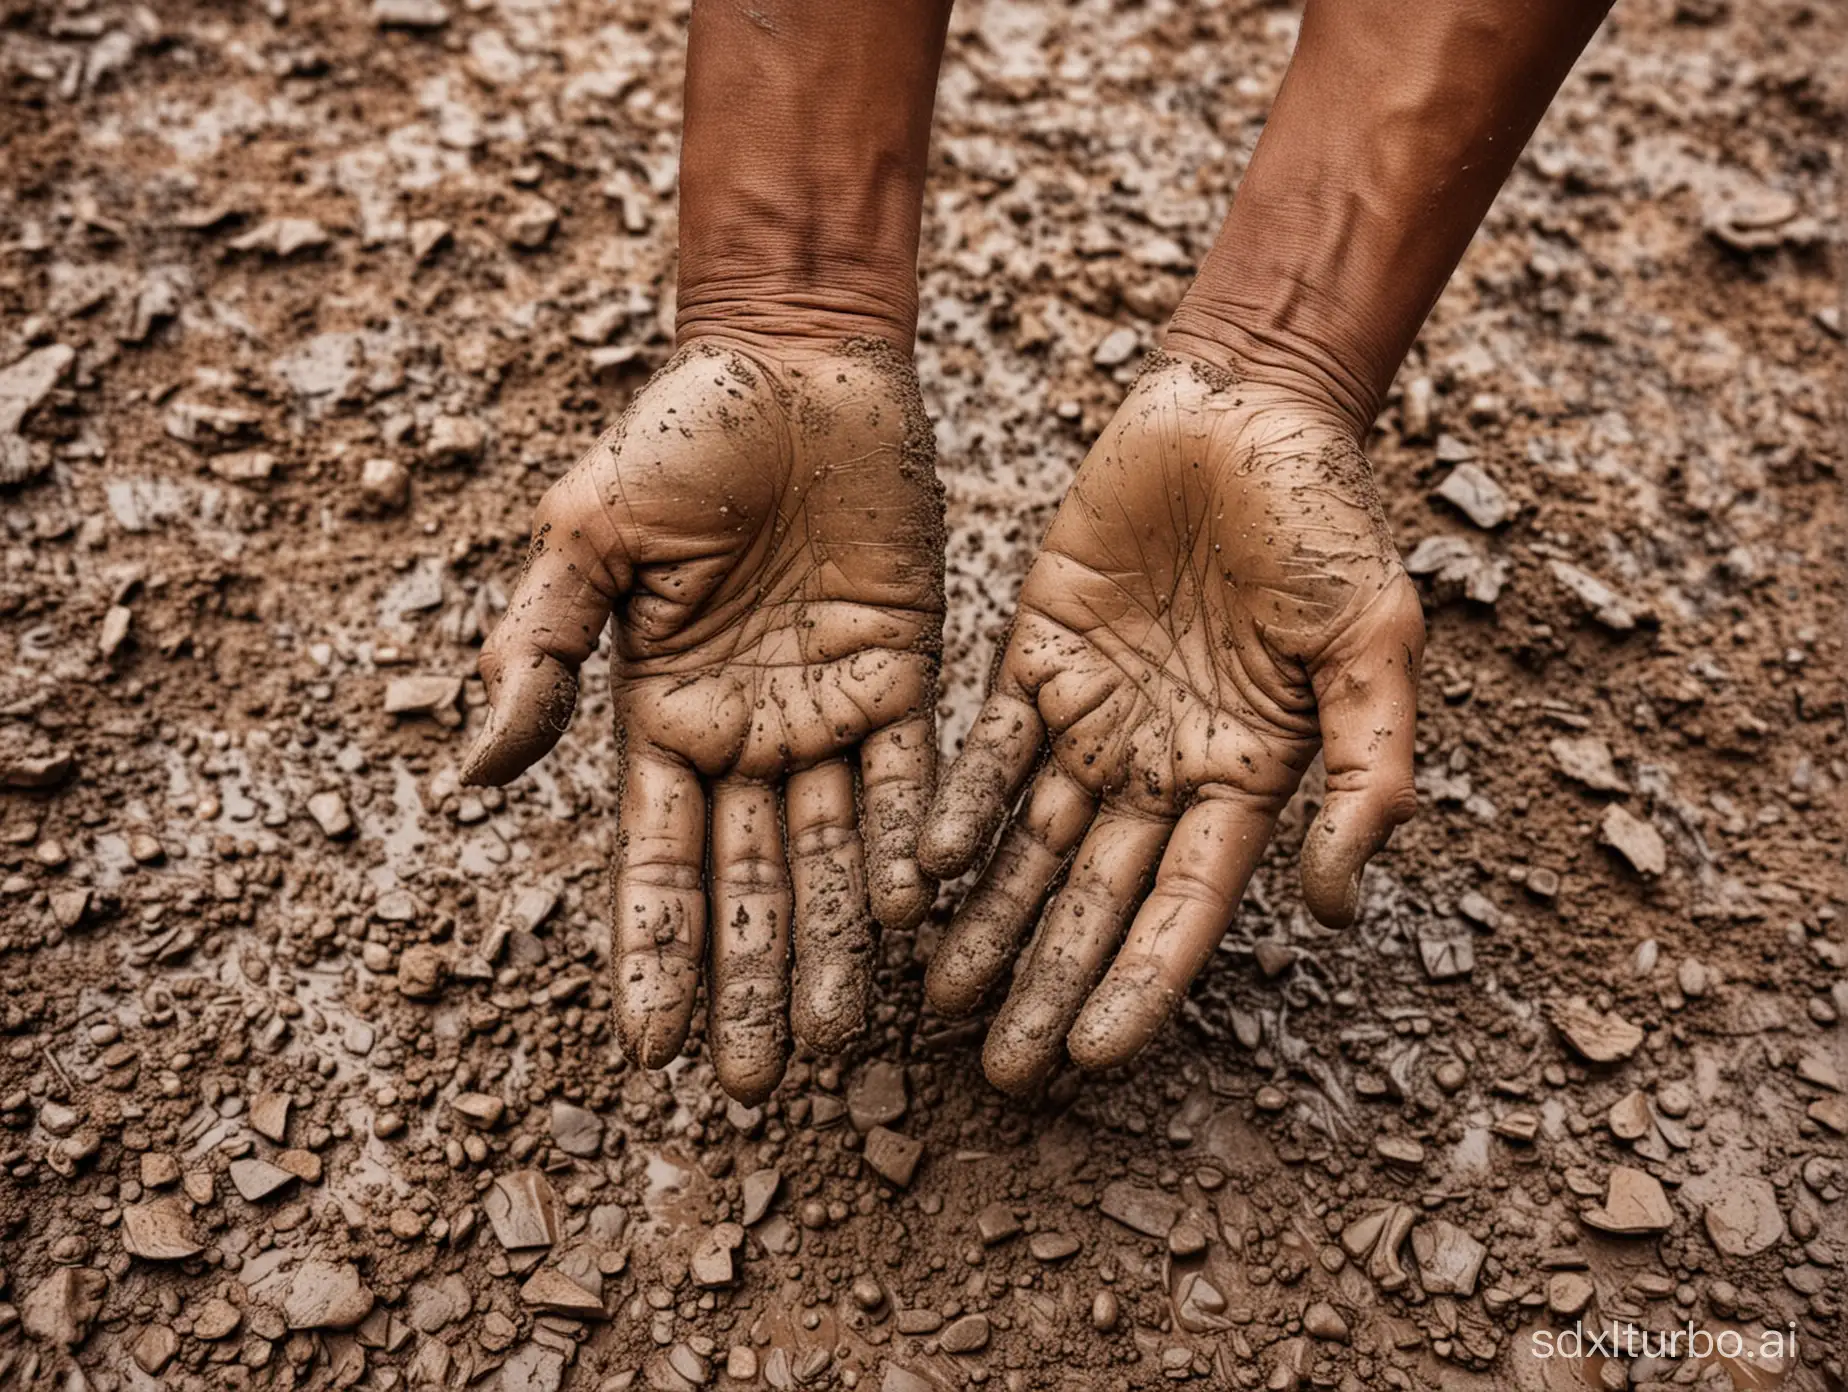 CloseUp-Shot-of-Indian-Farmers-Right-Hand-Covered-in-Mud